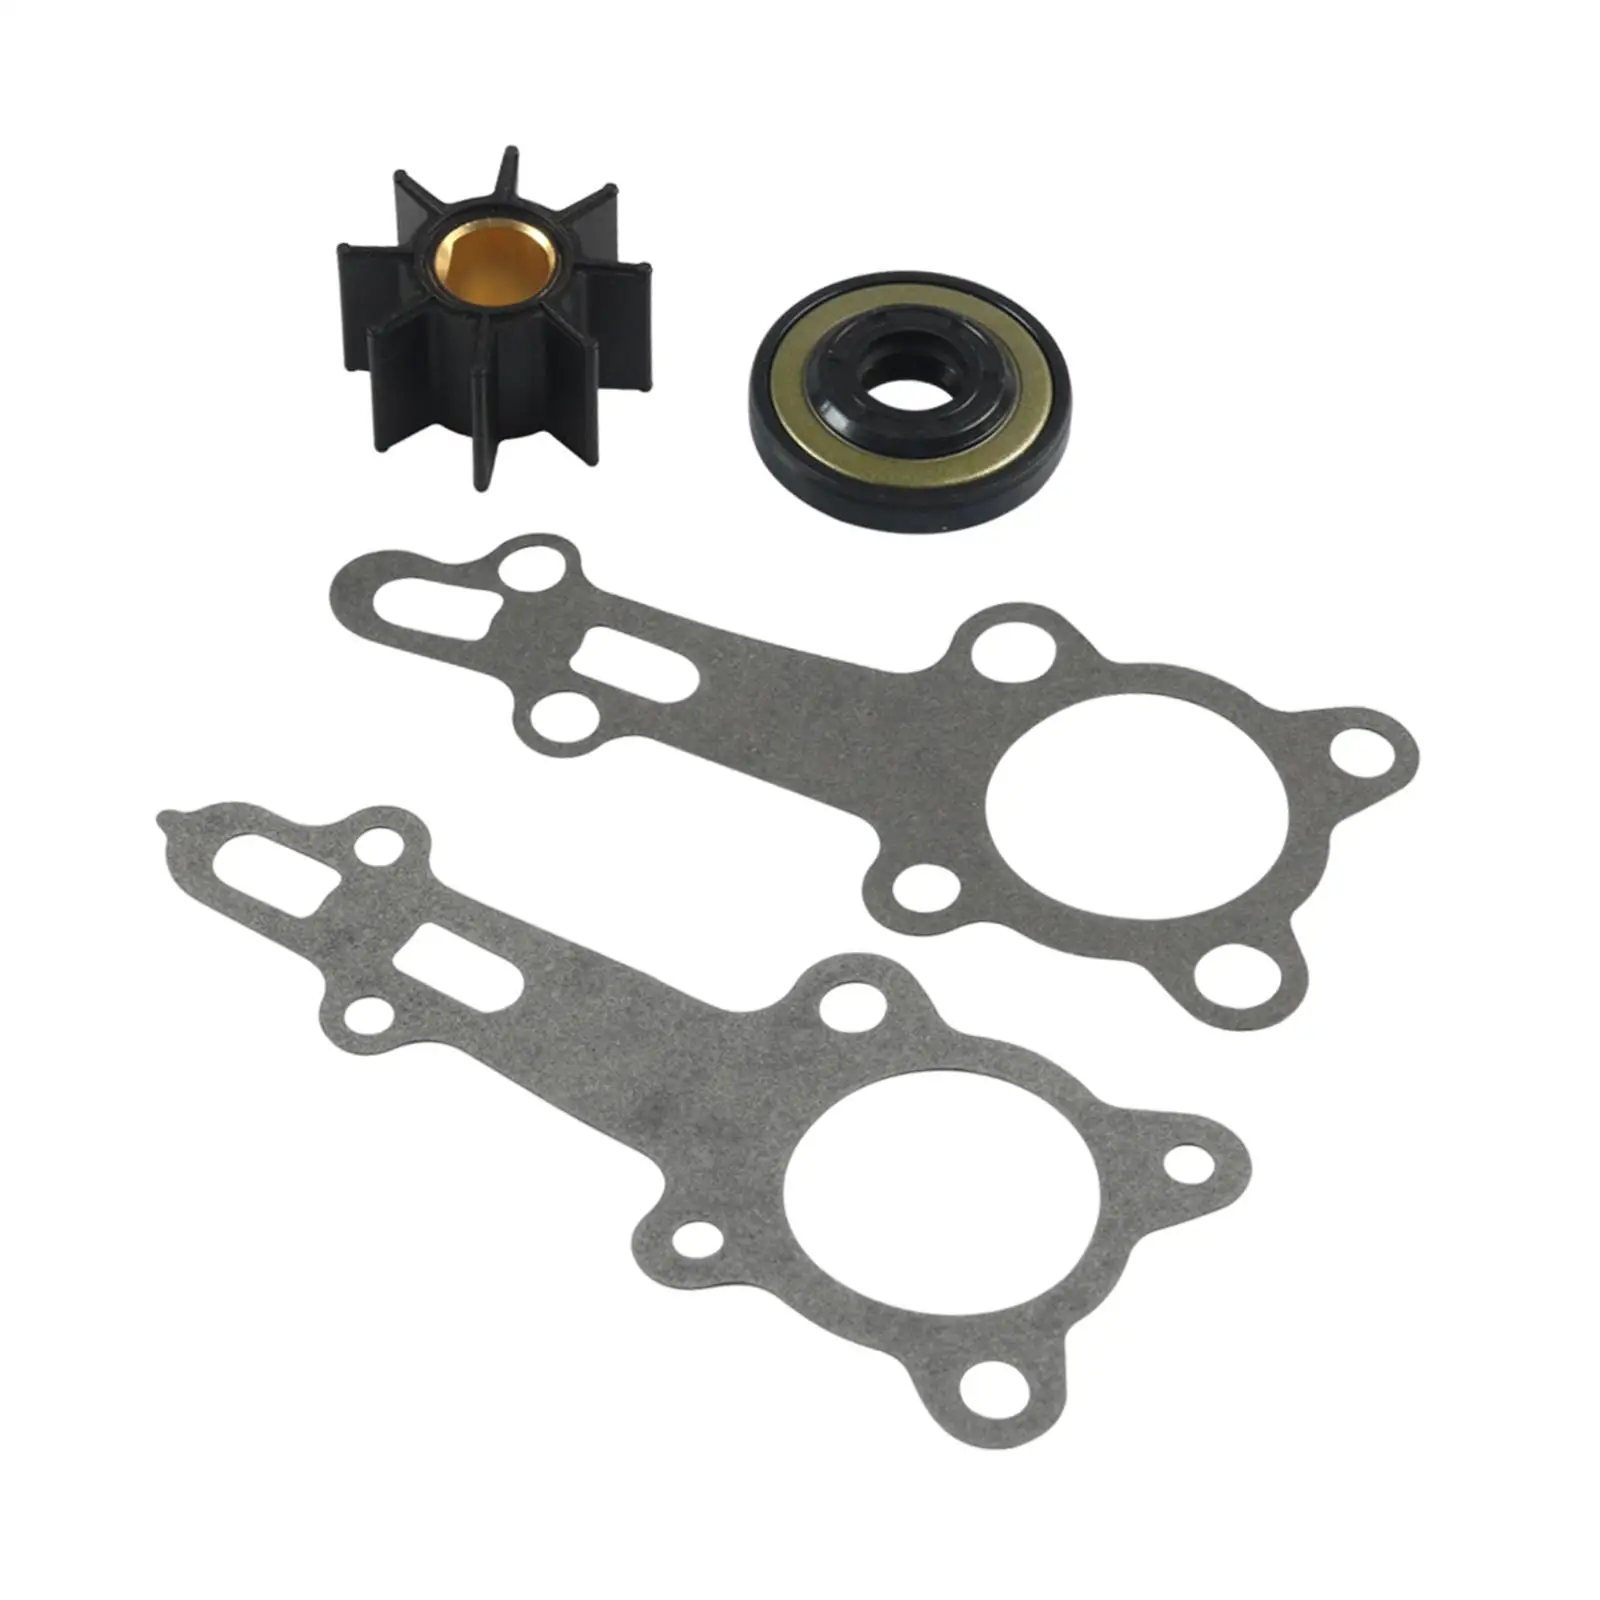 Water Pump Impeller Repair Kit 06192-881-c00 Stable Performance Marine Outboard Spare Parts for Honda 7.5HP BF6D BF6B 6HP